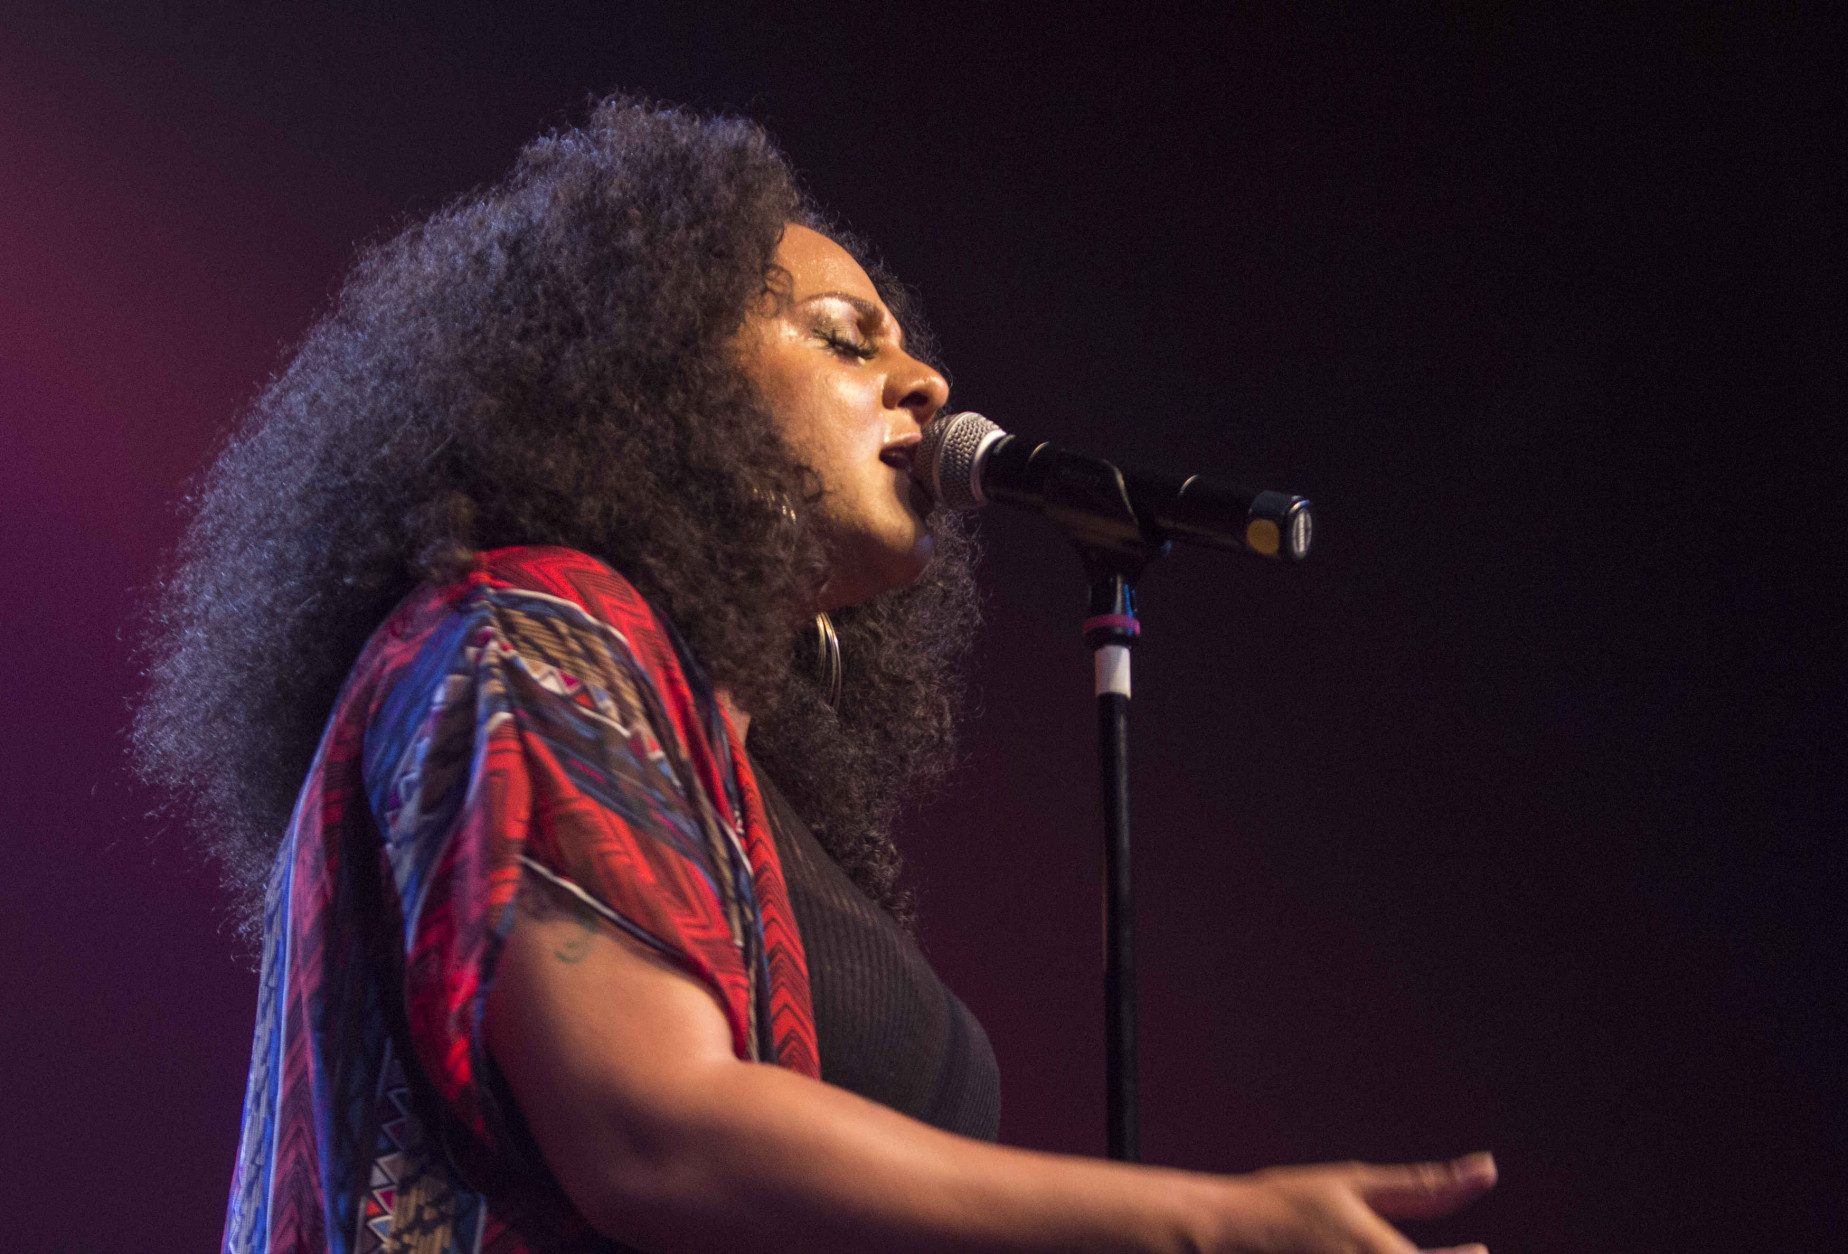 Marsha Ambrosius with Floetry performs during the Floetry Reunion Tour at Center Stage on Saturday, July 11, 2015, in Atlanta. (Photo by Robb D. Cohen/Invision/AP)